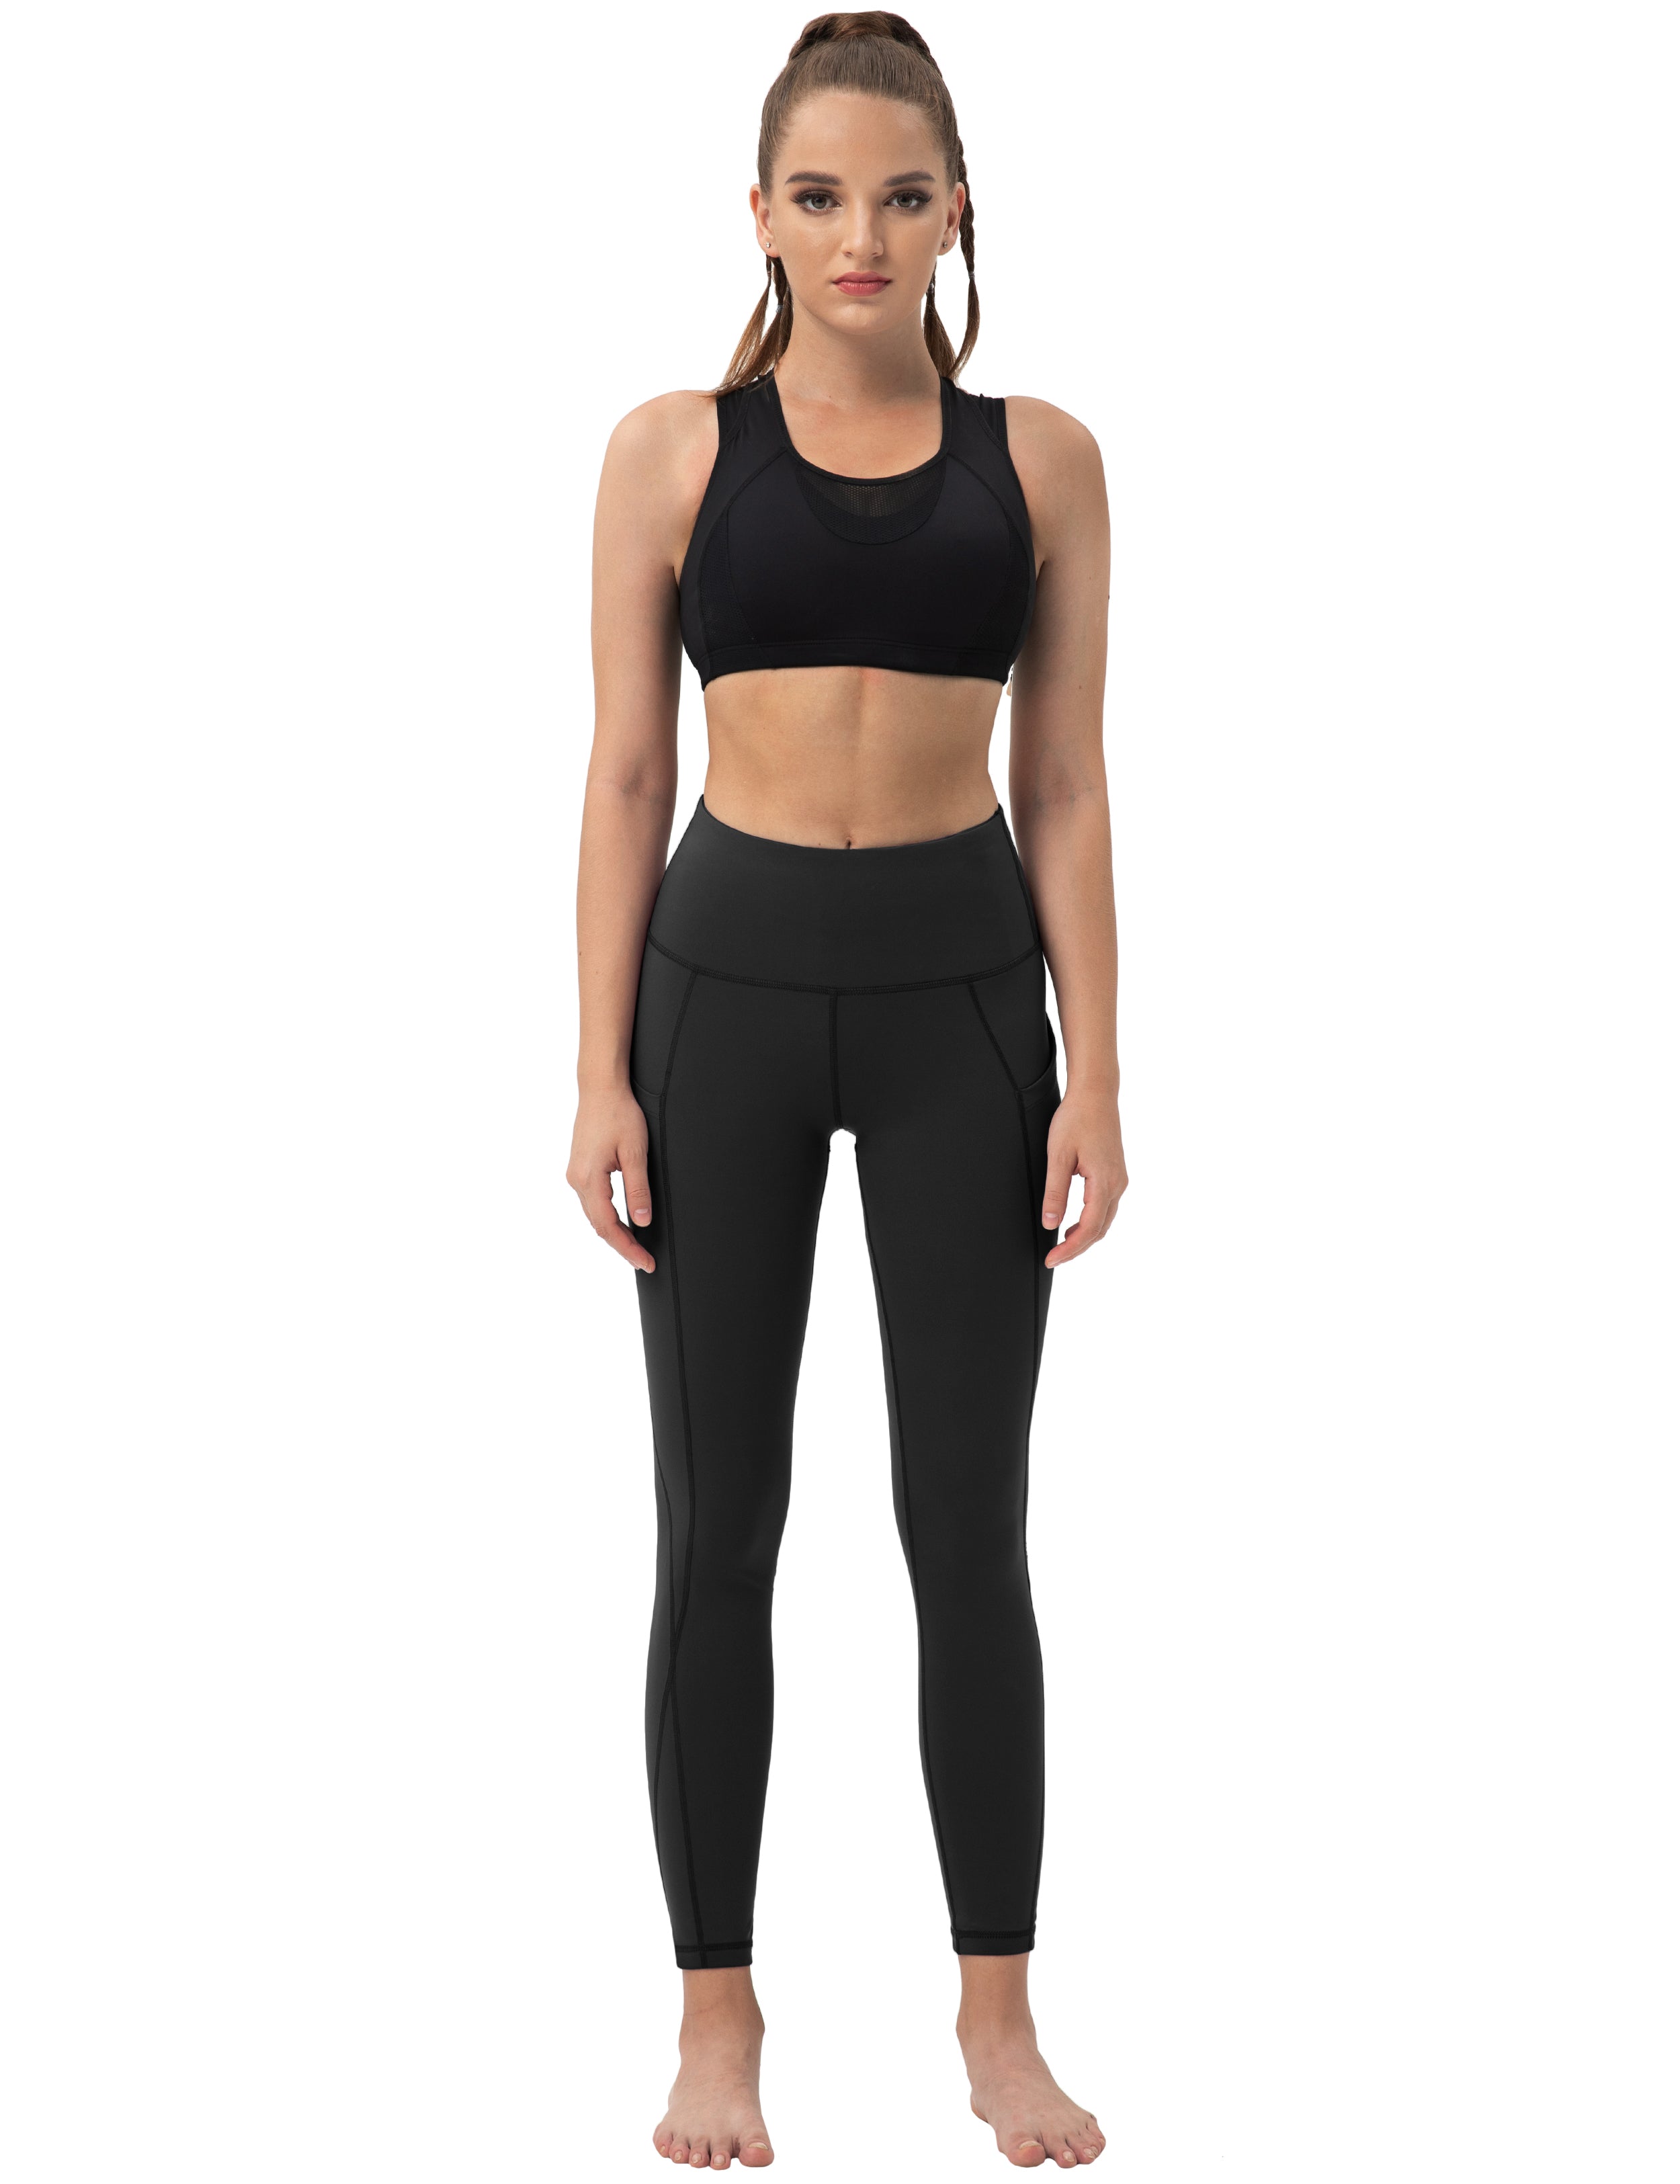 High Waist Side Pockets Plus Size Pants black 75% Nylon, 25% Spandex Fabric doesn't attract lint easily 4-way stretch No see-through Moisture-wicking Tummy control Inner pocket